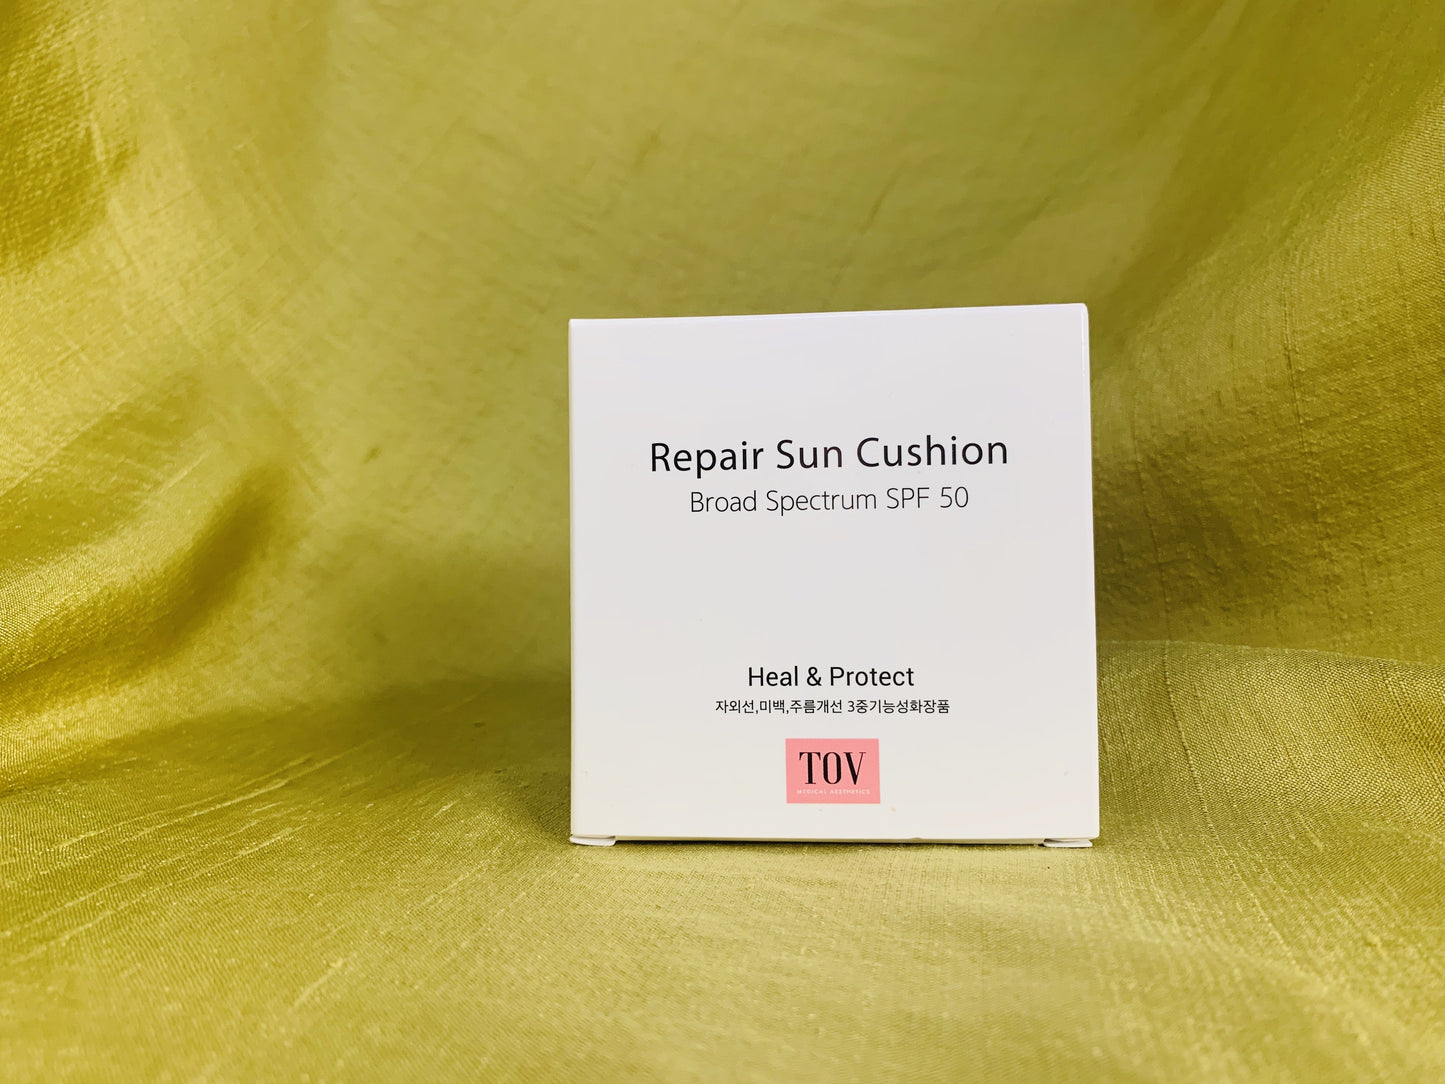 HOP+ Skin Repair Sun Cushion Hydrating Coverage -  Broad Spectrum SPF 50, 12g (House of PLLA formerly Sculplla)